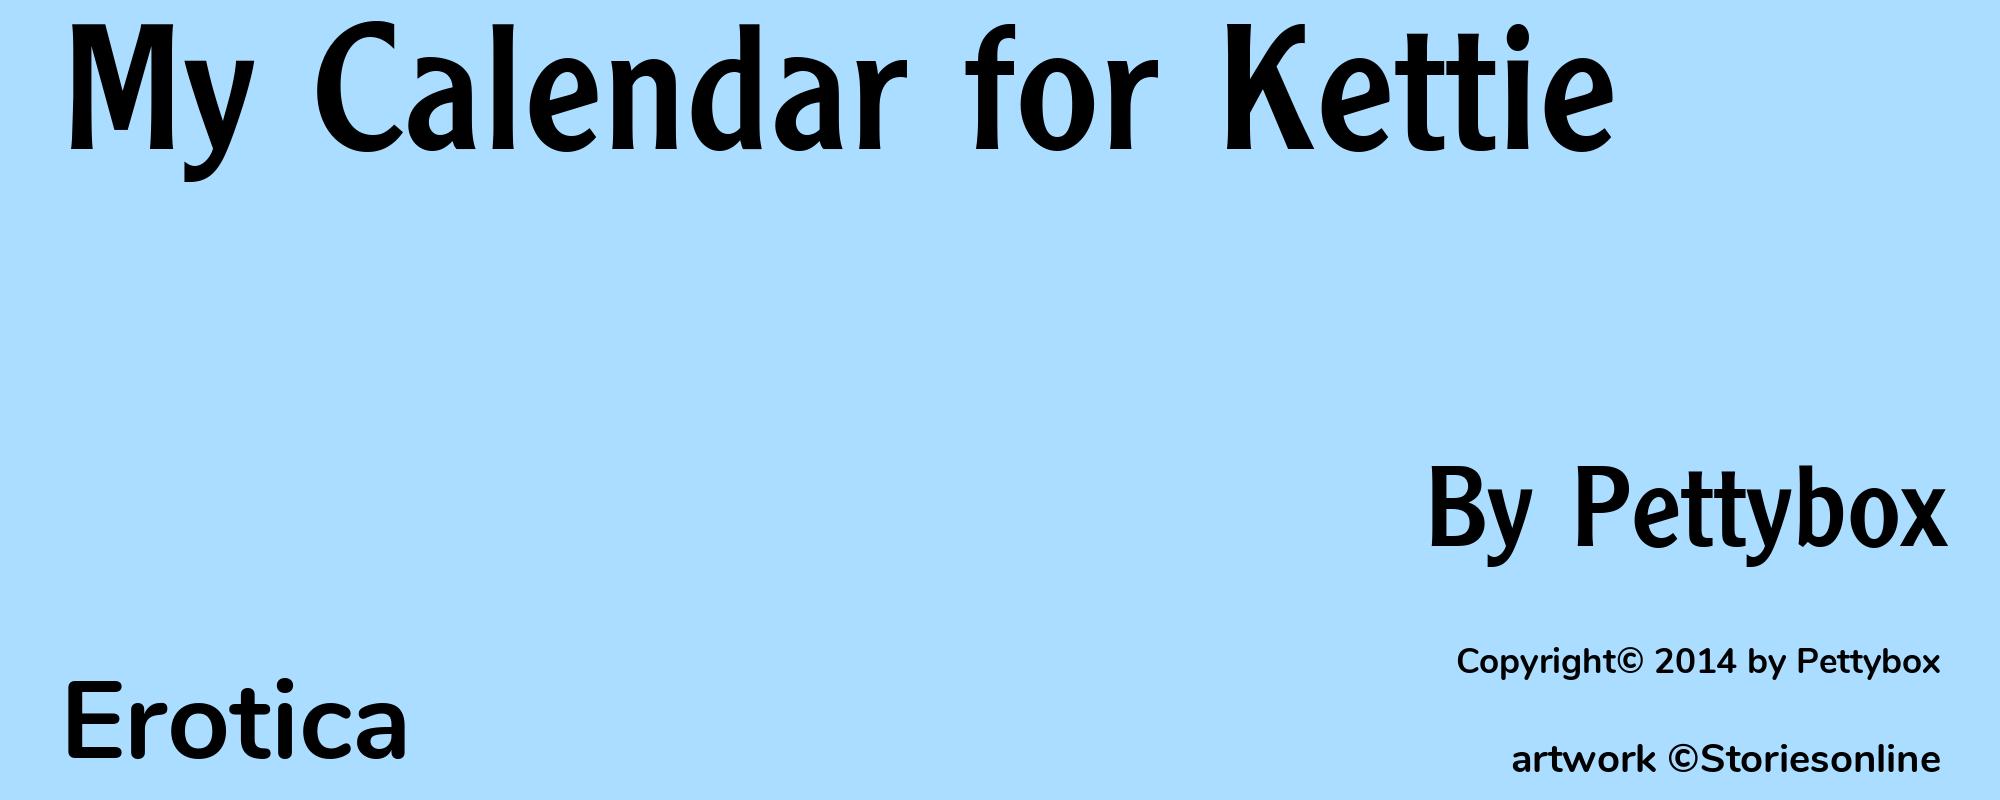 My Calendar for Kettie - Cover